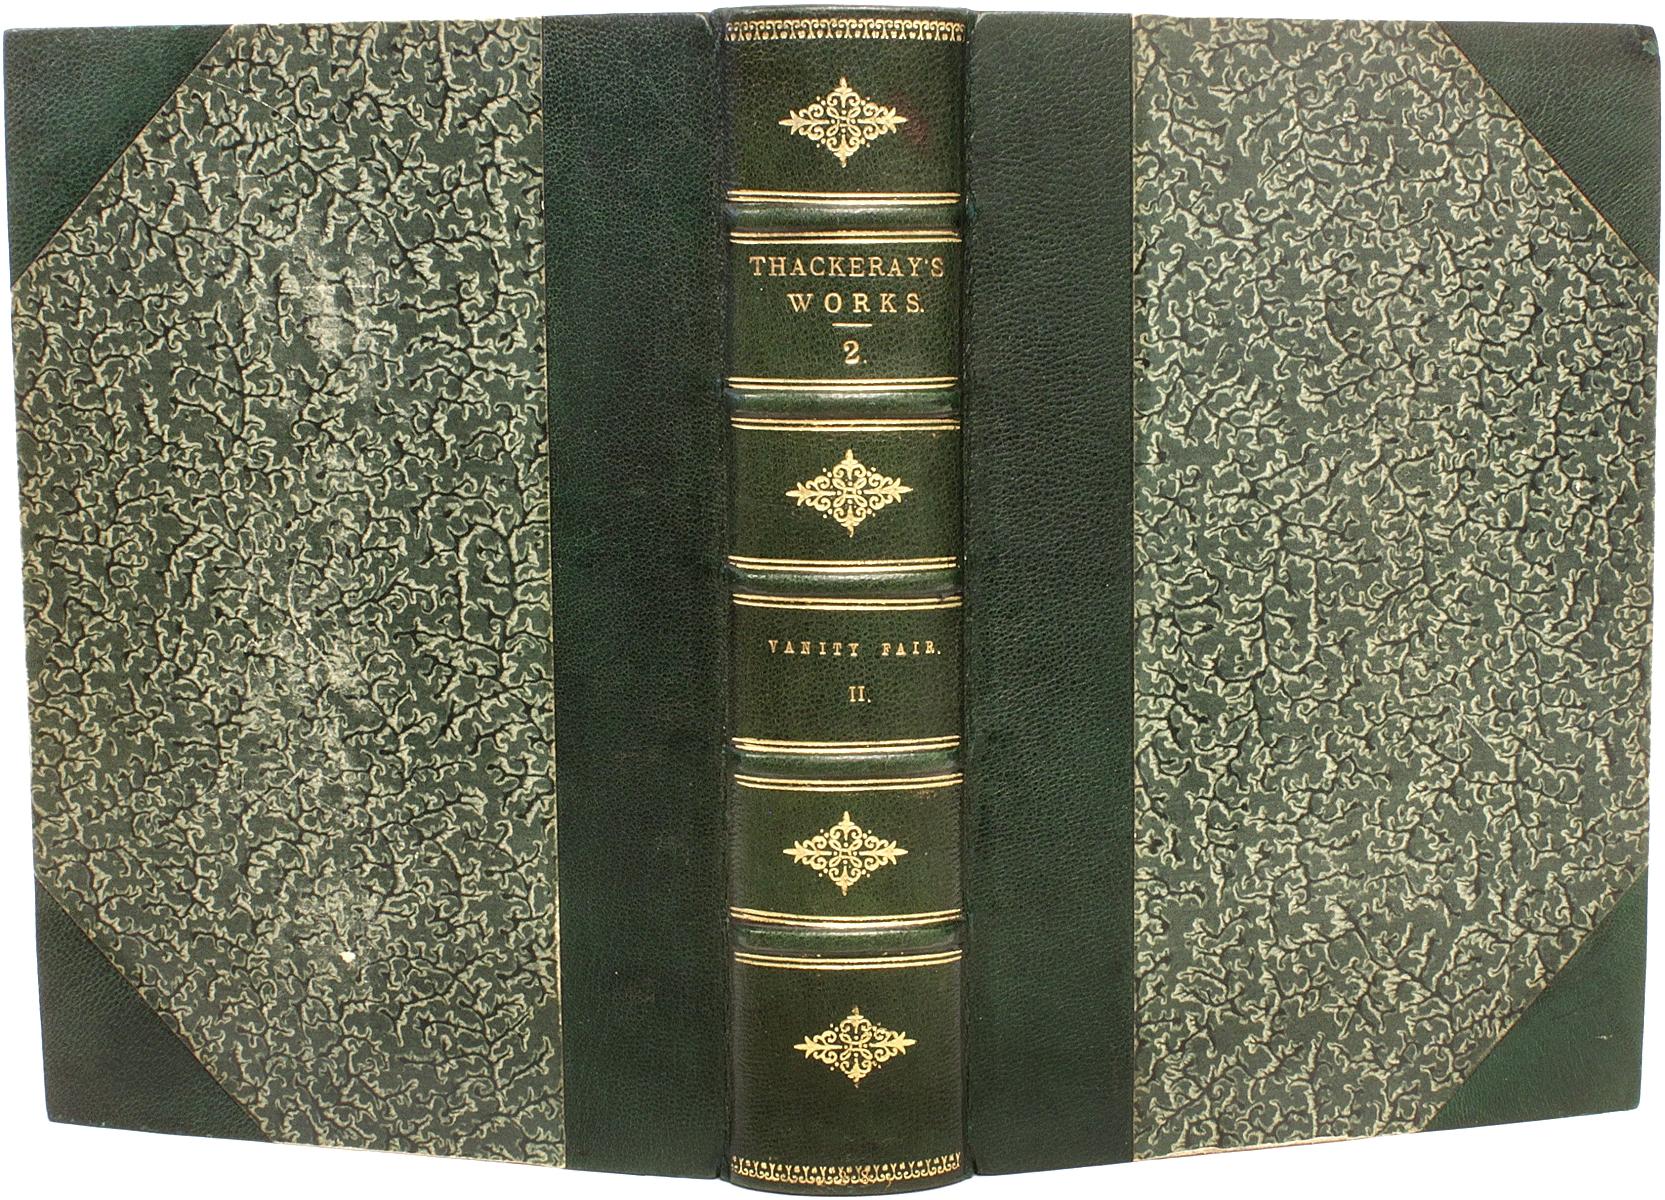 Late 19th Century Complete Works of William Thackeray, 26 Vols, in a Fine Leather Binding